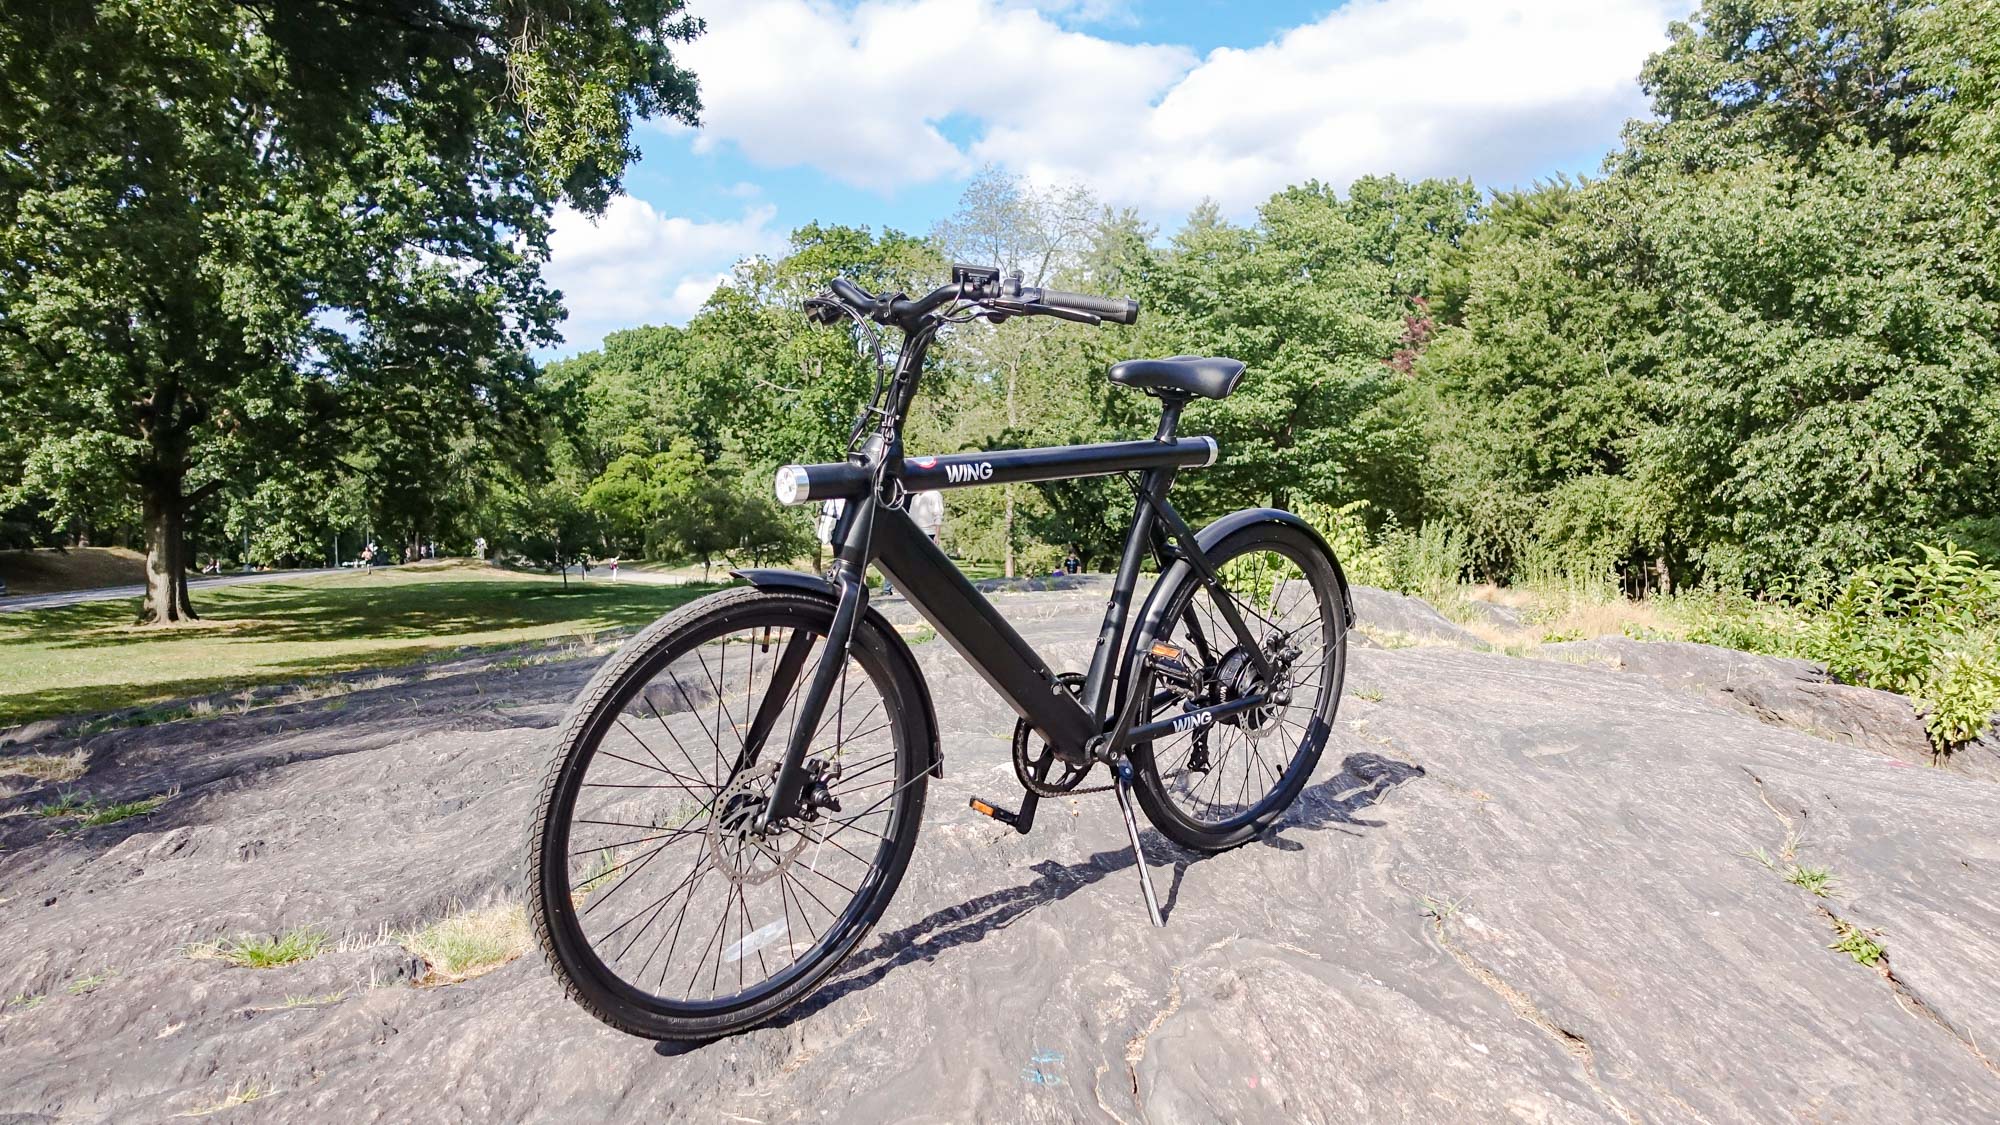 Propella Electric Bikes - Lightweight and Affordable E-Bikes